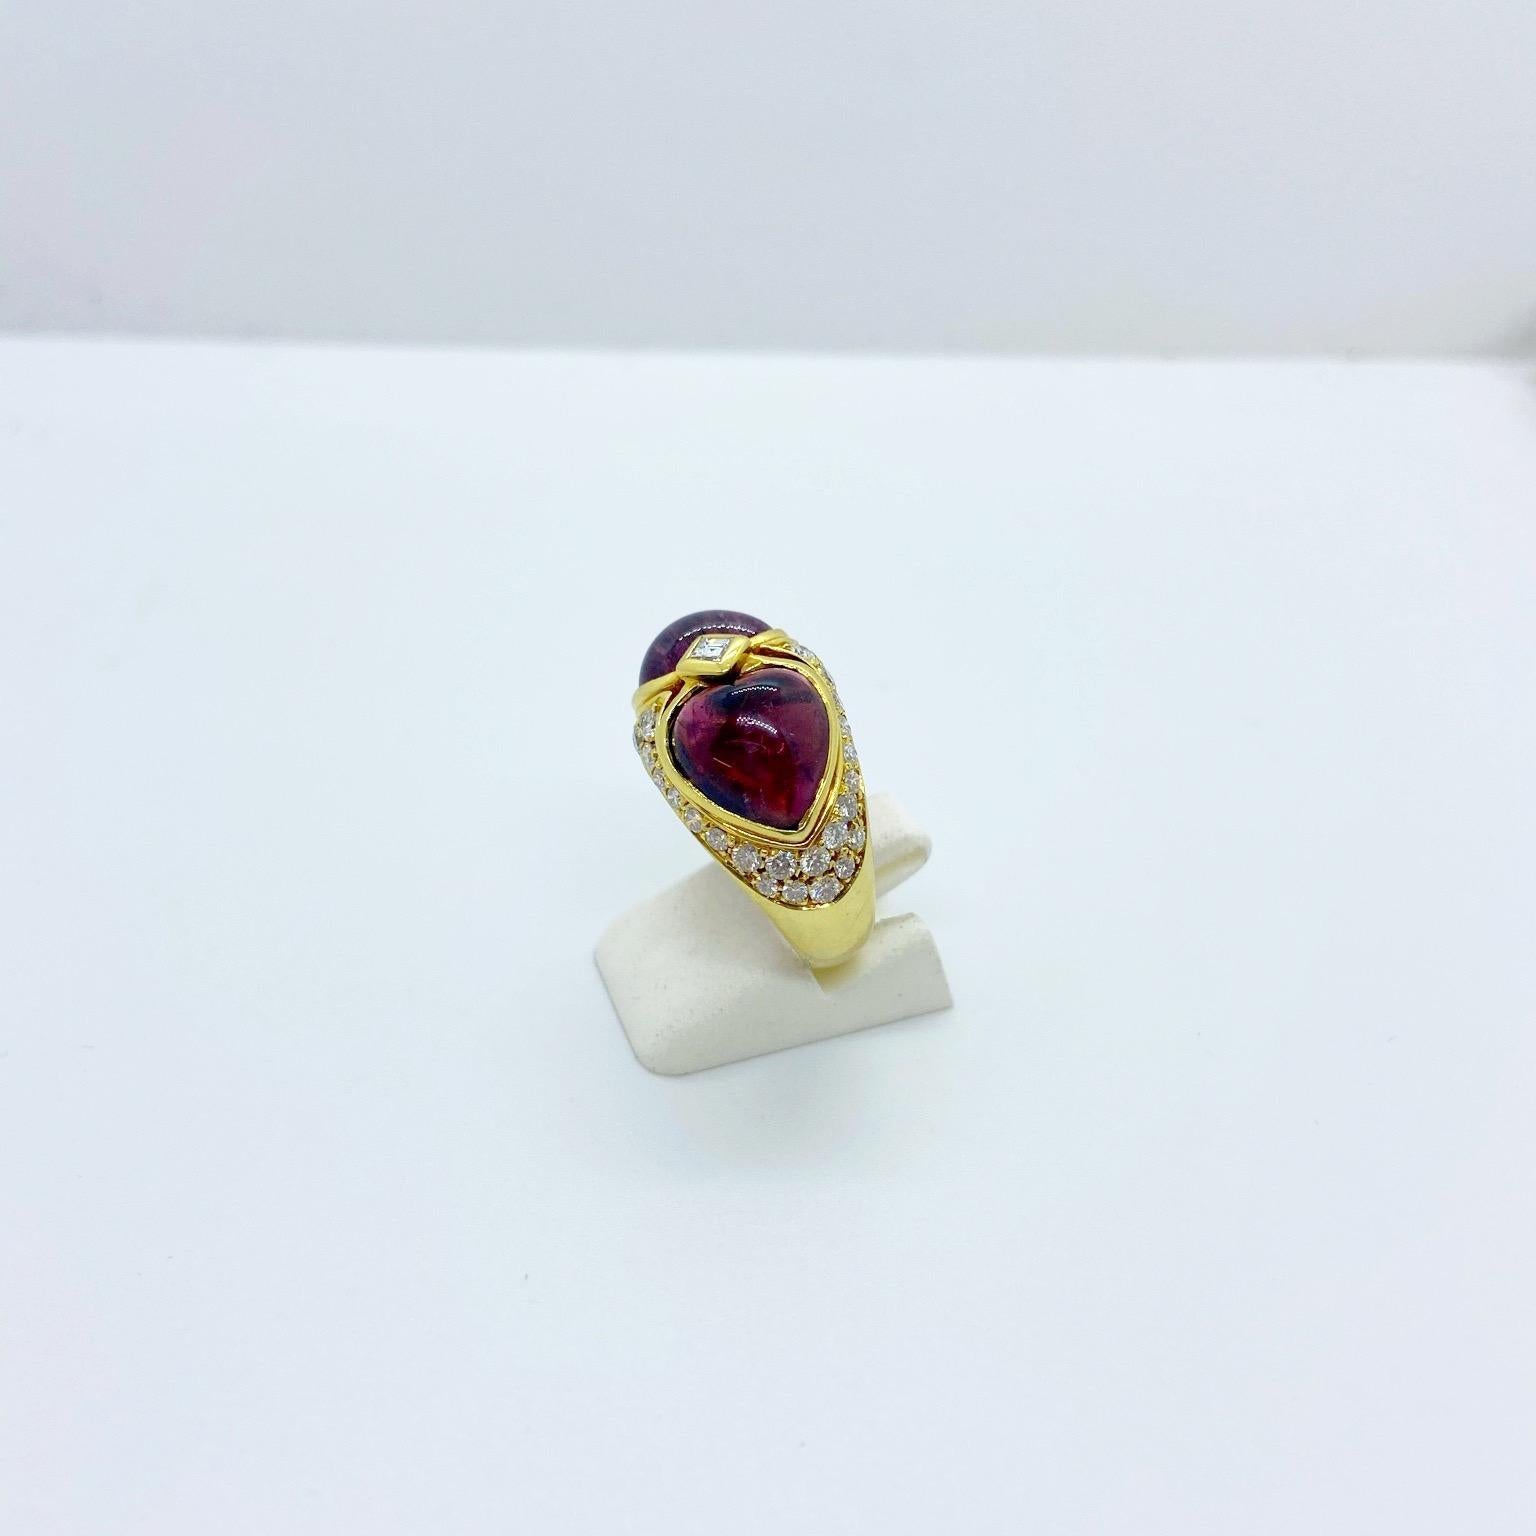 Two cabochon rubelite  hearts are the centerpiece of this 18 karat yellow gold ring. The hearts are joined in the center by a bezel set square cut diamond and accented all around with pave round brilliant diamonds.
Rubellite weight 8.25